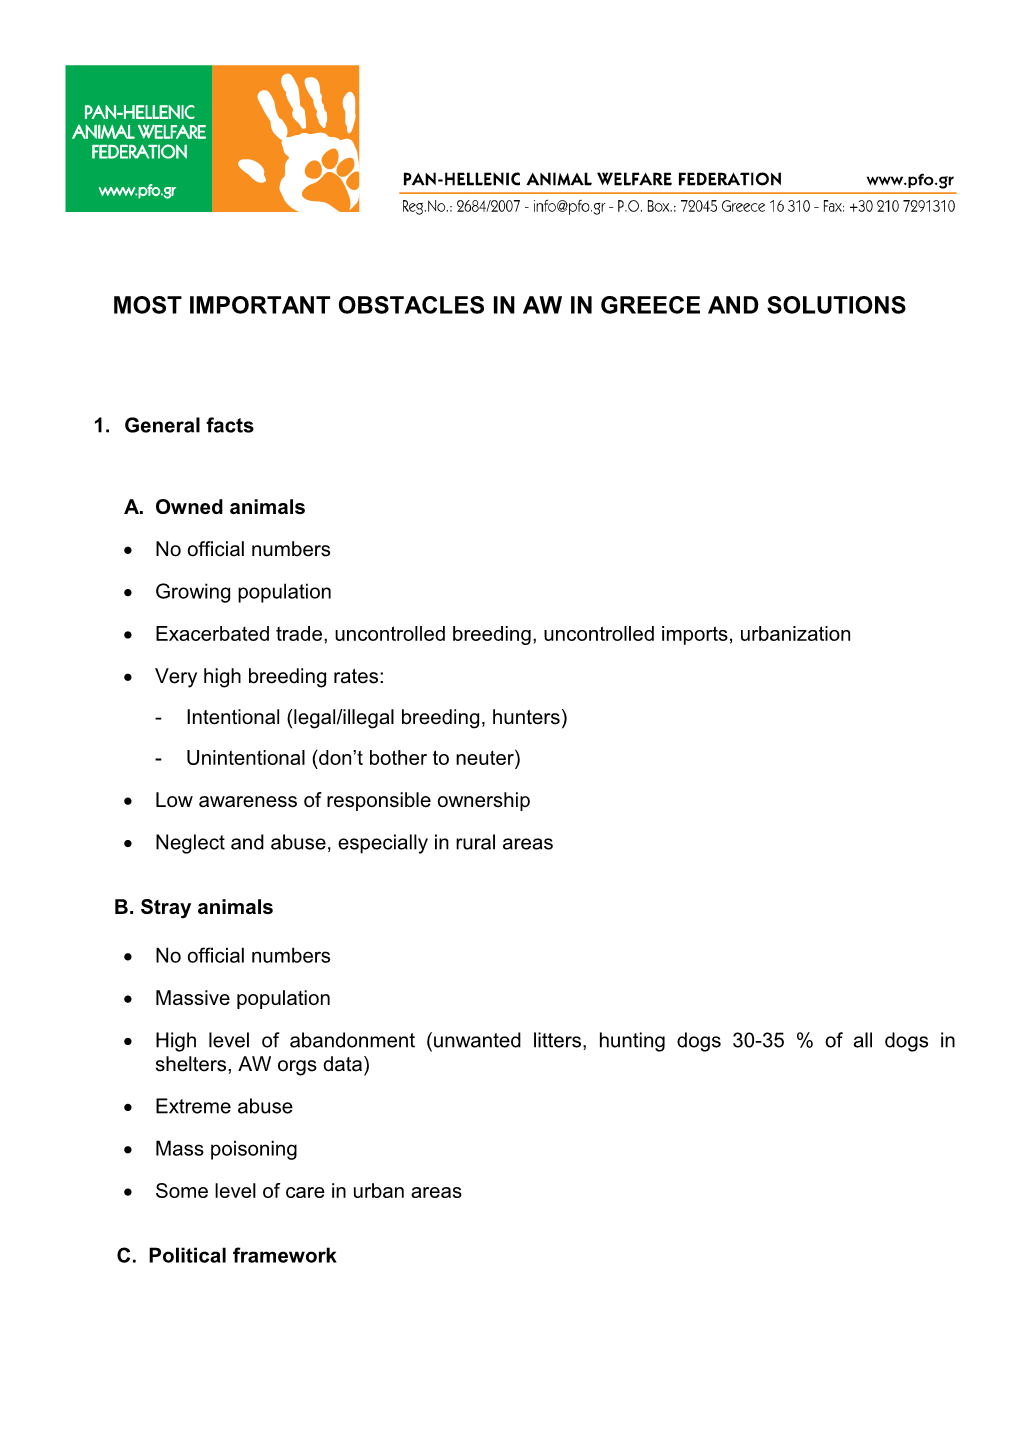 Most Important Obstacles in Aw in Greece and Solutions